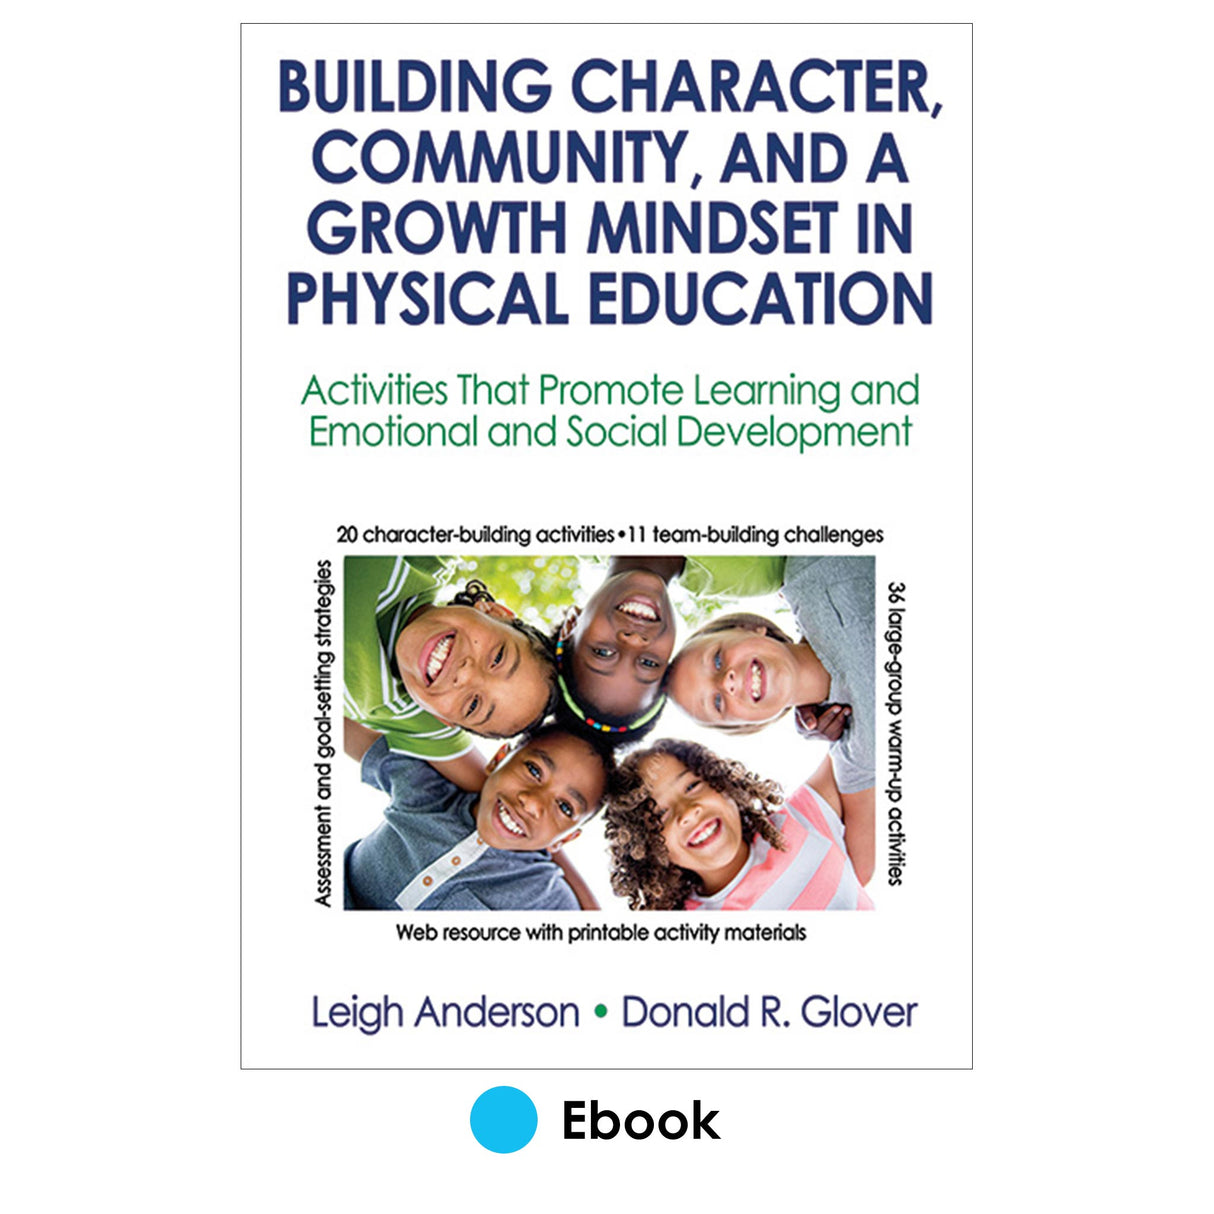 Building Character, Community, and a Growth Mindset in Physical Education PDF With Web Resource